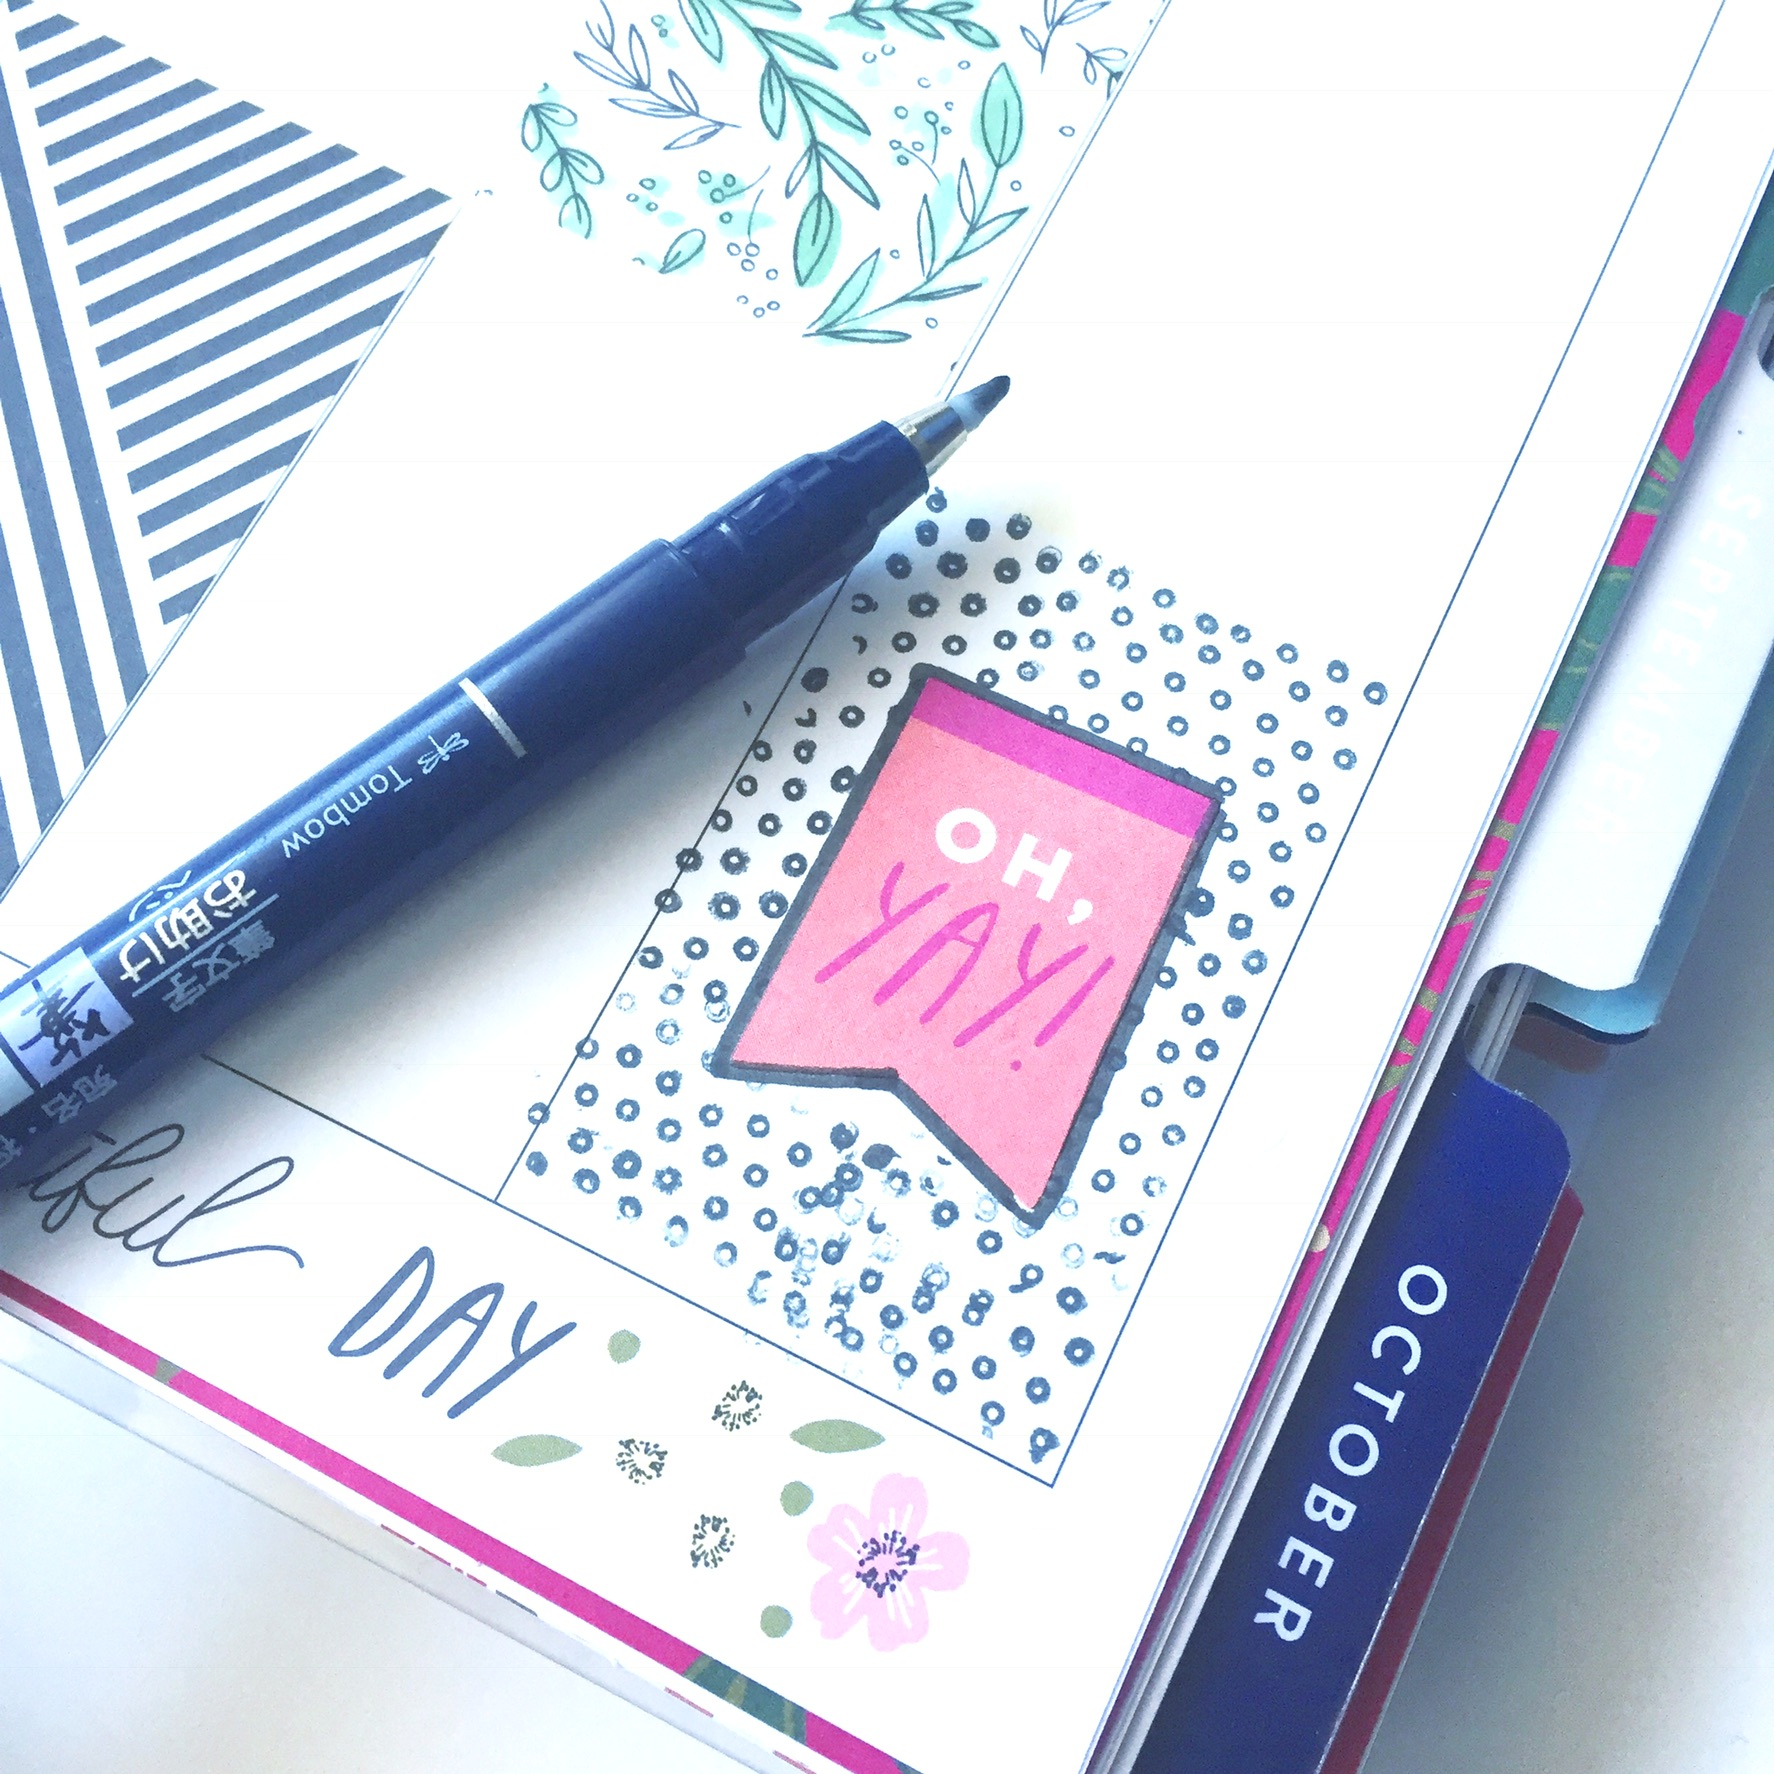 Learn some techniques for how to add color and patterns to your planner with @waffleflower and @tombowusa products. Lauren of @renmadecalligraphy (renmadecalligraphy.com) loves to give lettering and crafting tips!